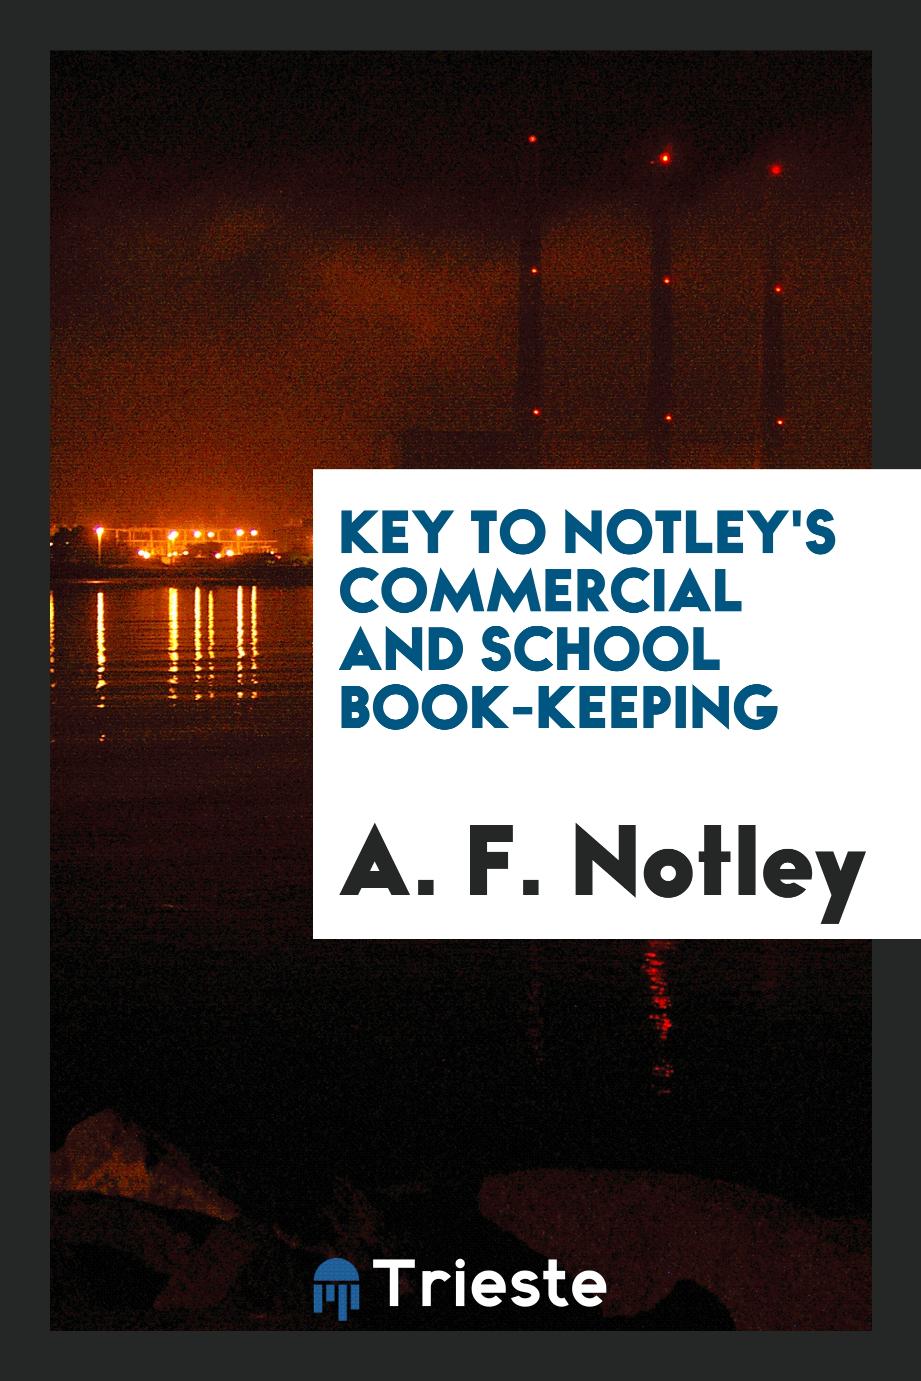 Key to Notley's Commercial and School Book-Keeping